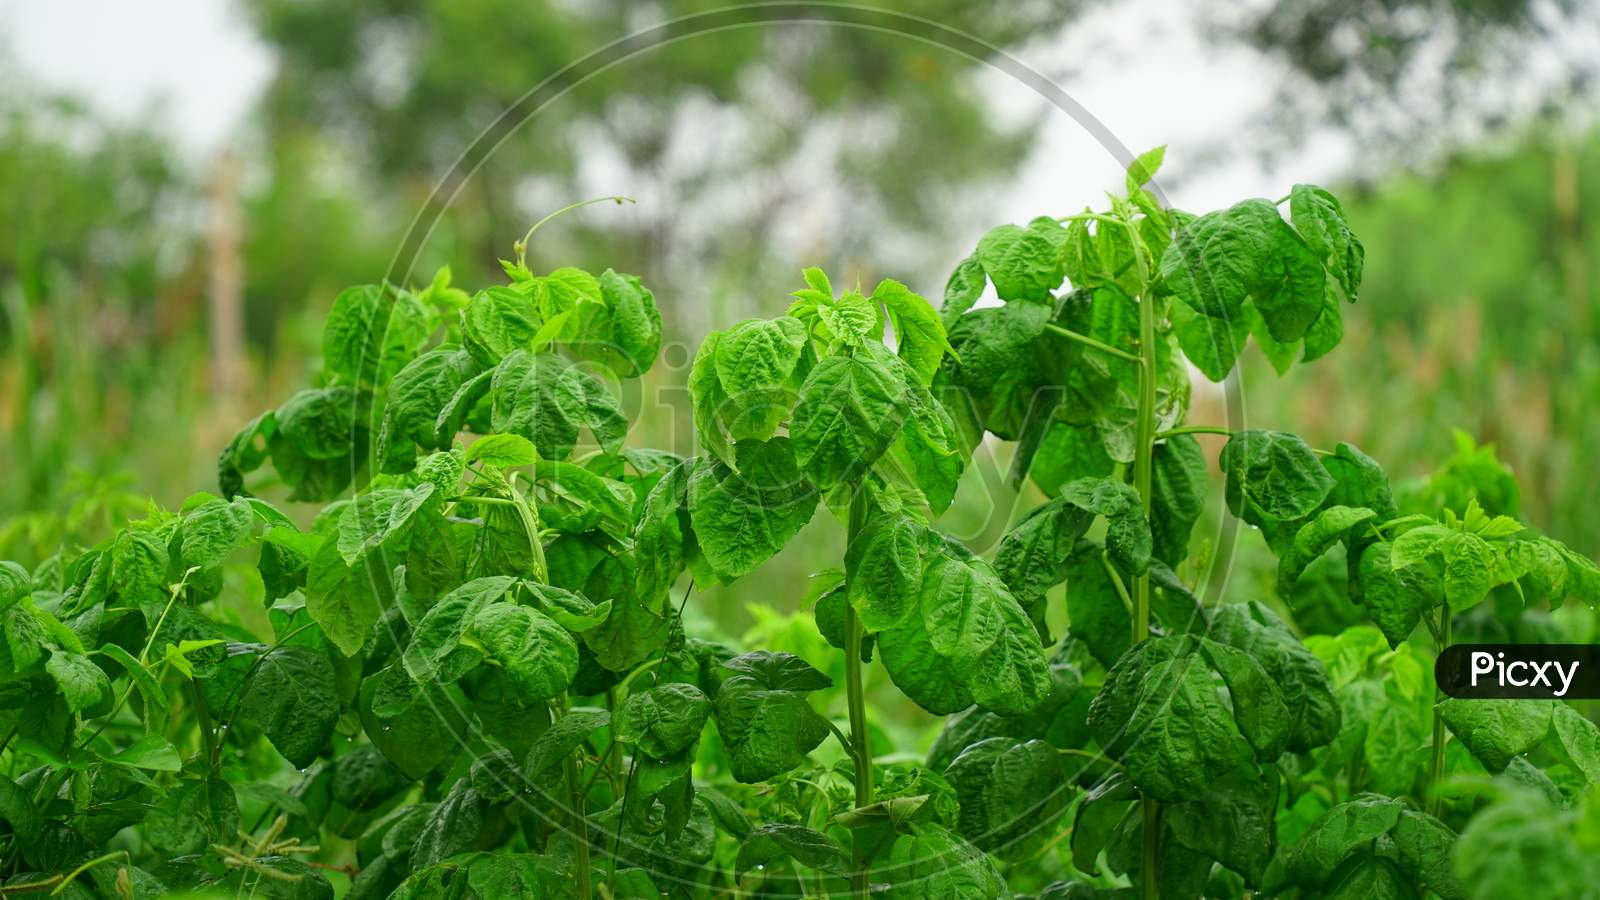 Cluster Beans Or Gawar Phali(Guar)Plant In Field,Cyamopsis Tetragonoloba,Is An Annual Legume And The Source Of Guar Gum.